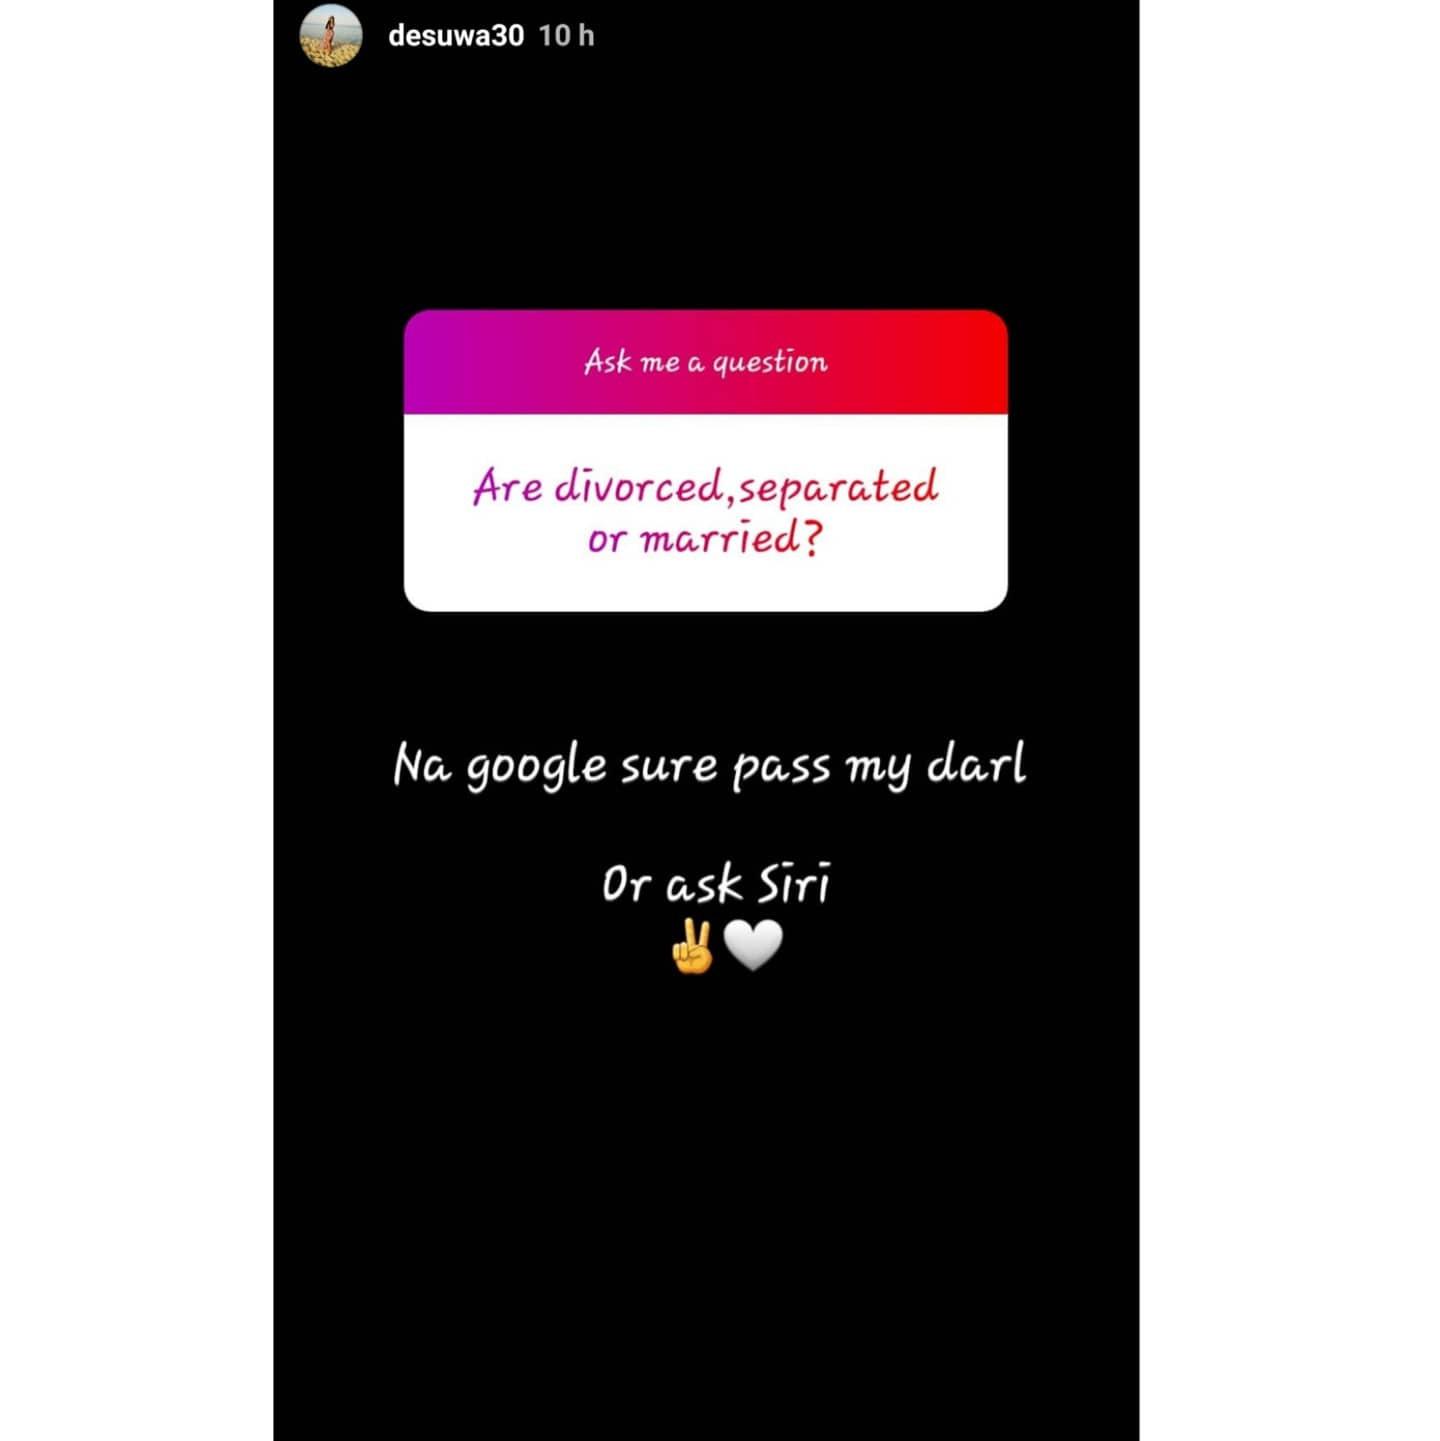 "Ask Google or Siri" - Odion Ighalo's wife to fans asking about her marital status after changing username